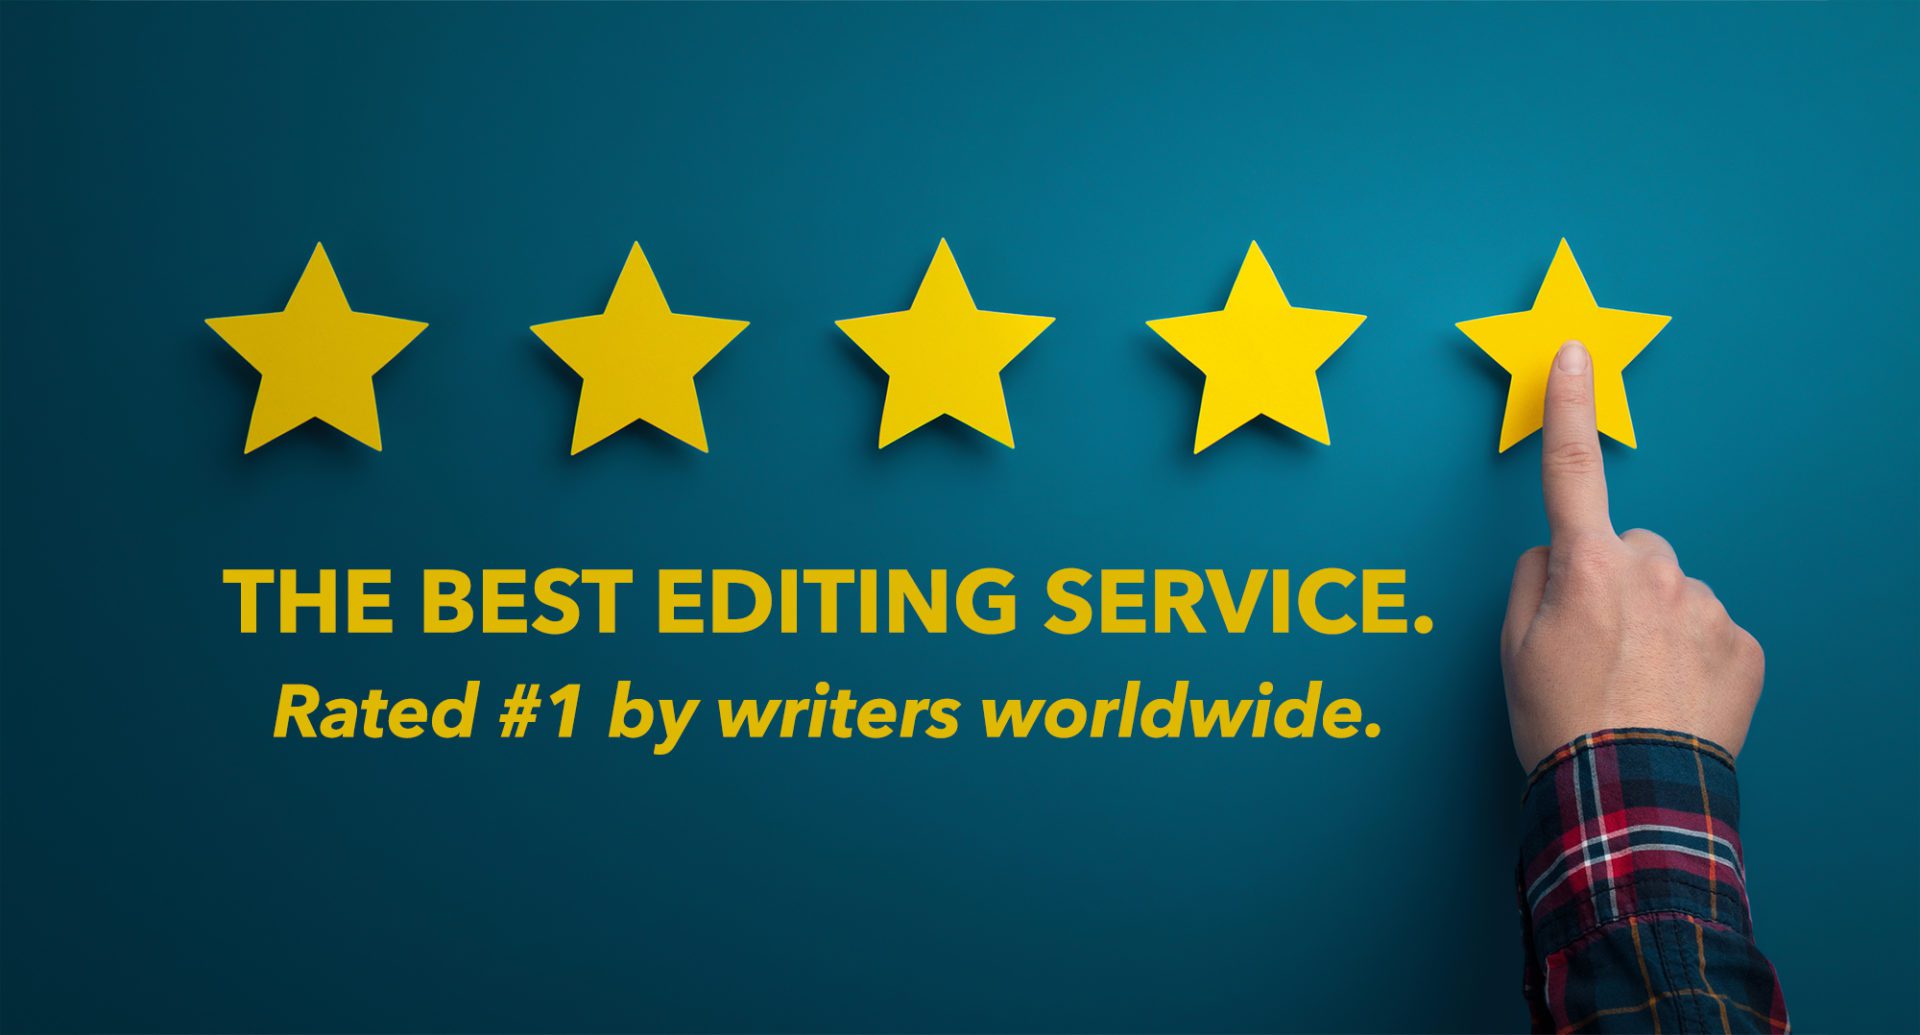 Best editing service on the internet — 5 star rating